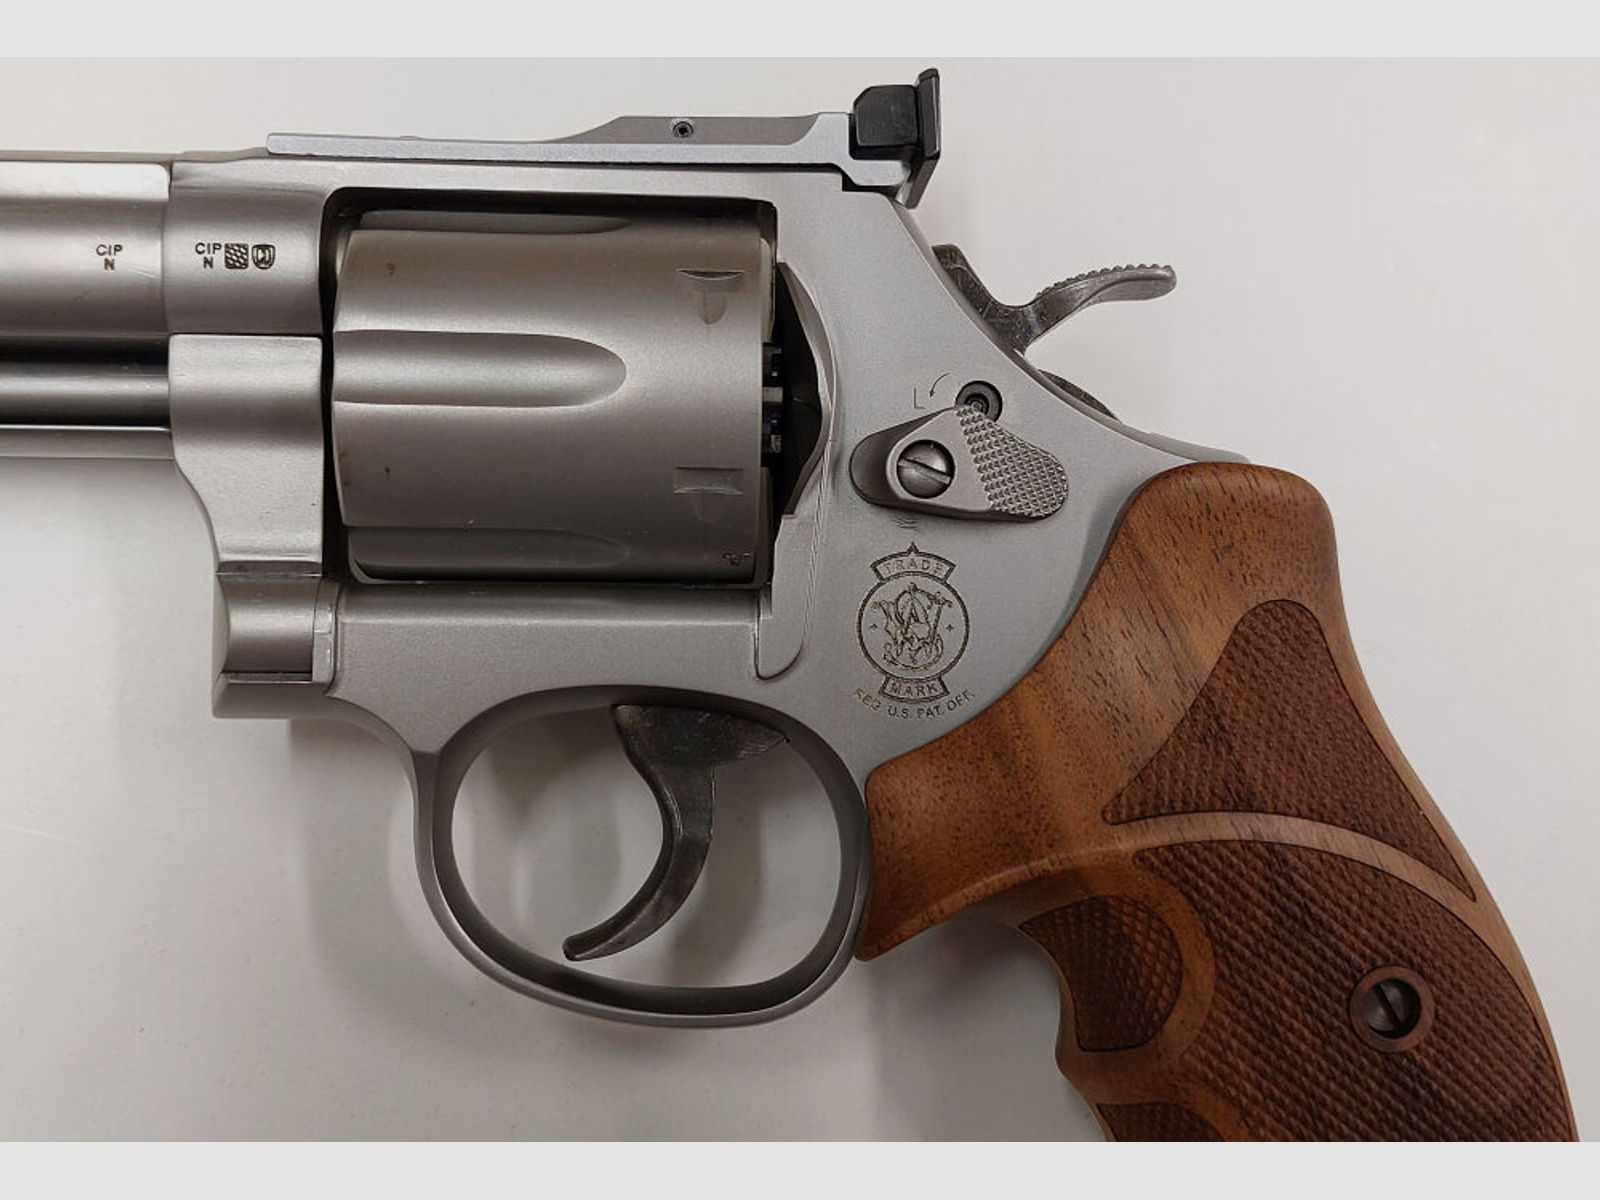 Smith & Wesson	 Sport-/Matchrevolver Smith & Wesson Mod.686-6 Target Champion Stainless Steel 6" im Kaliber .357Mag.